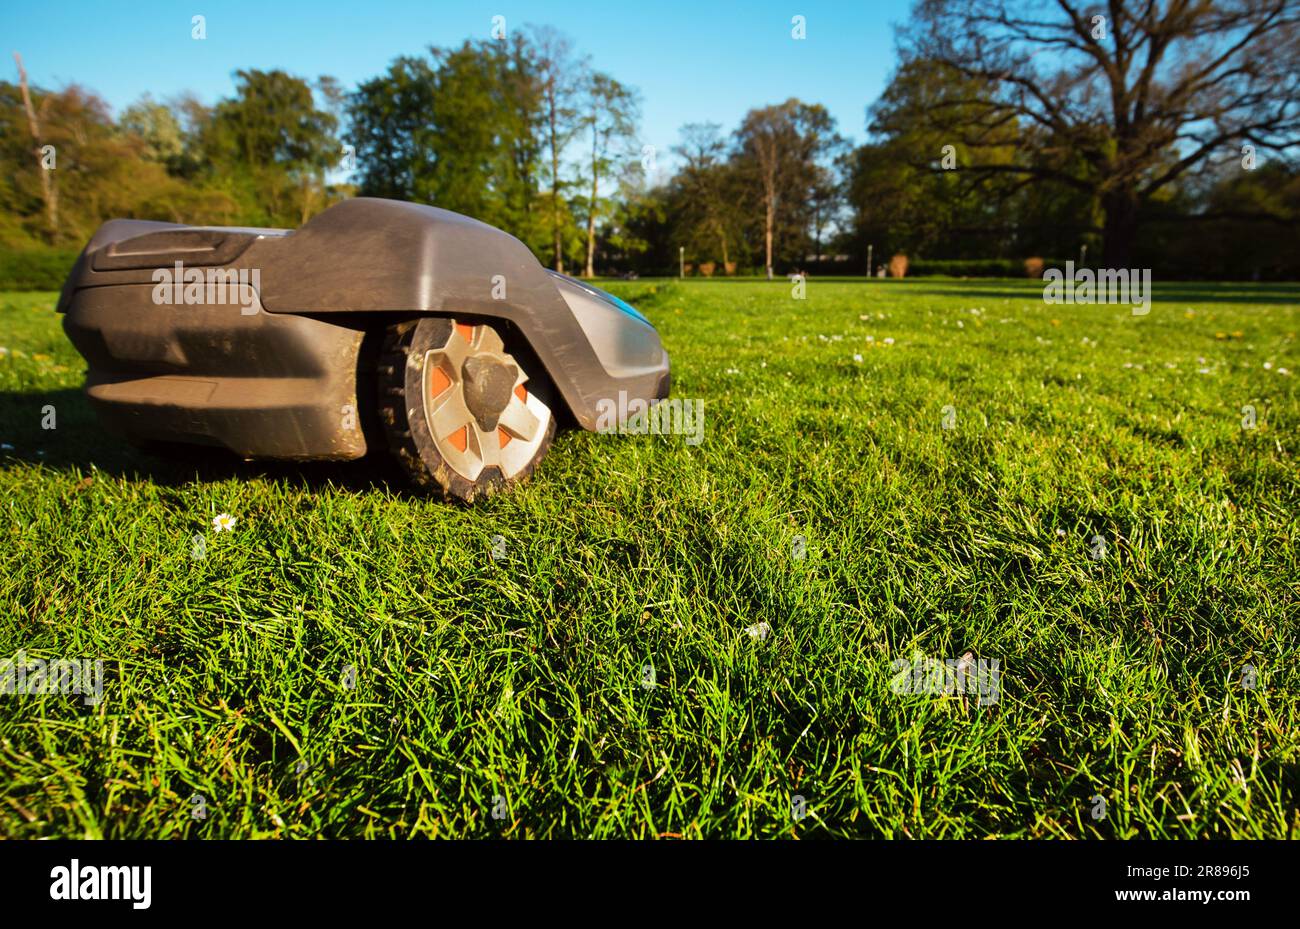 Robotic lawnmower in action on a sunny day Stock Photo